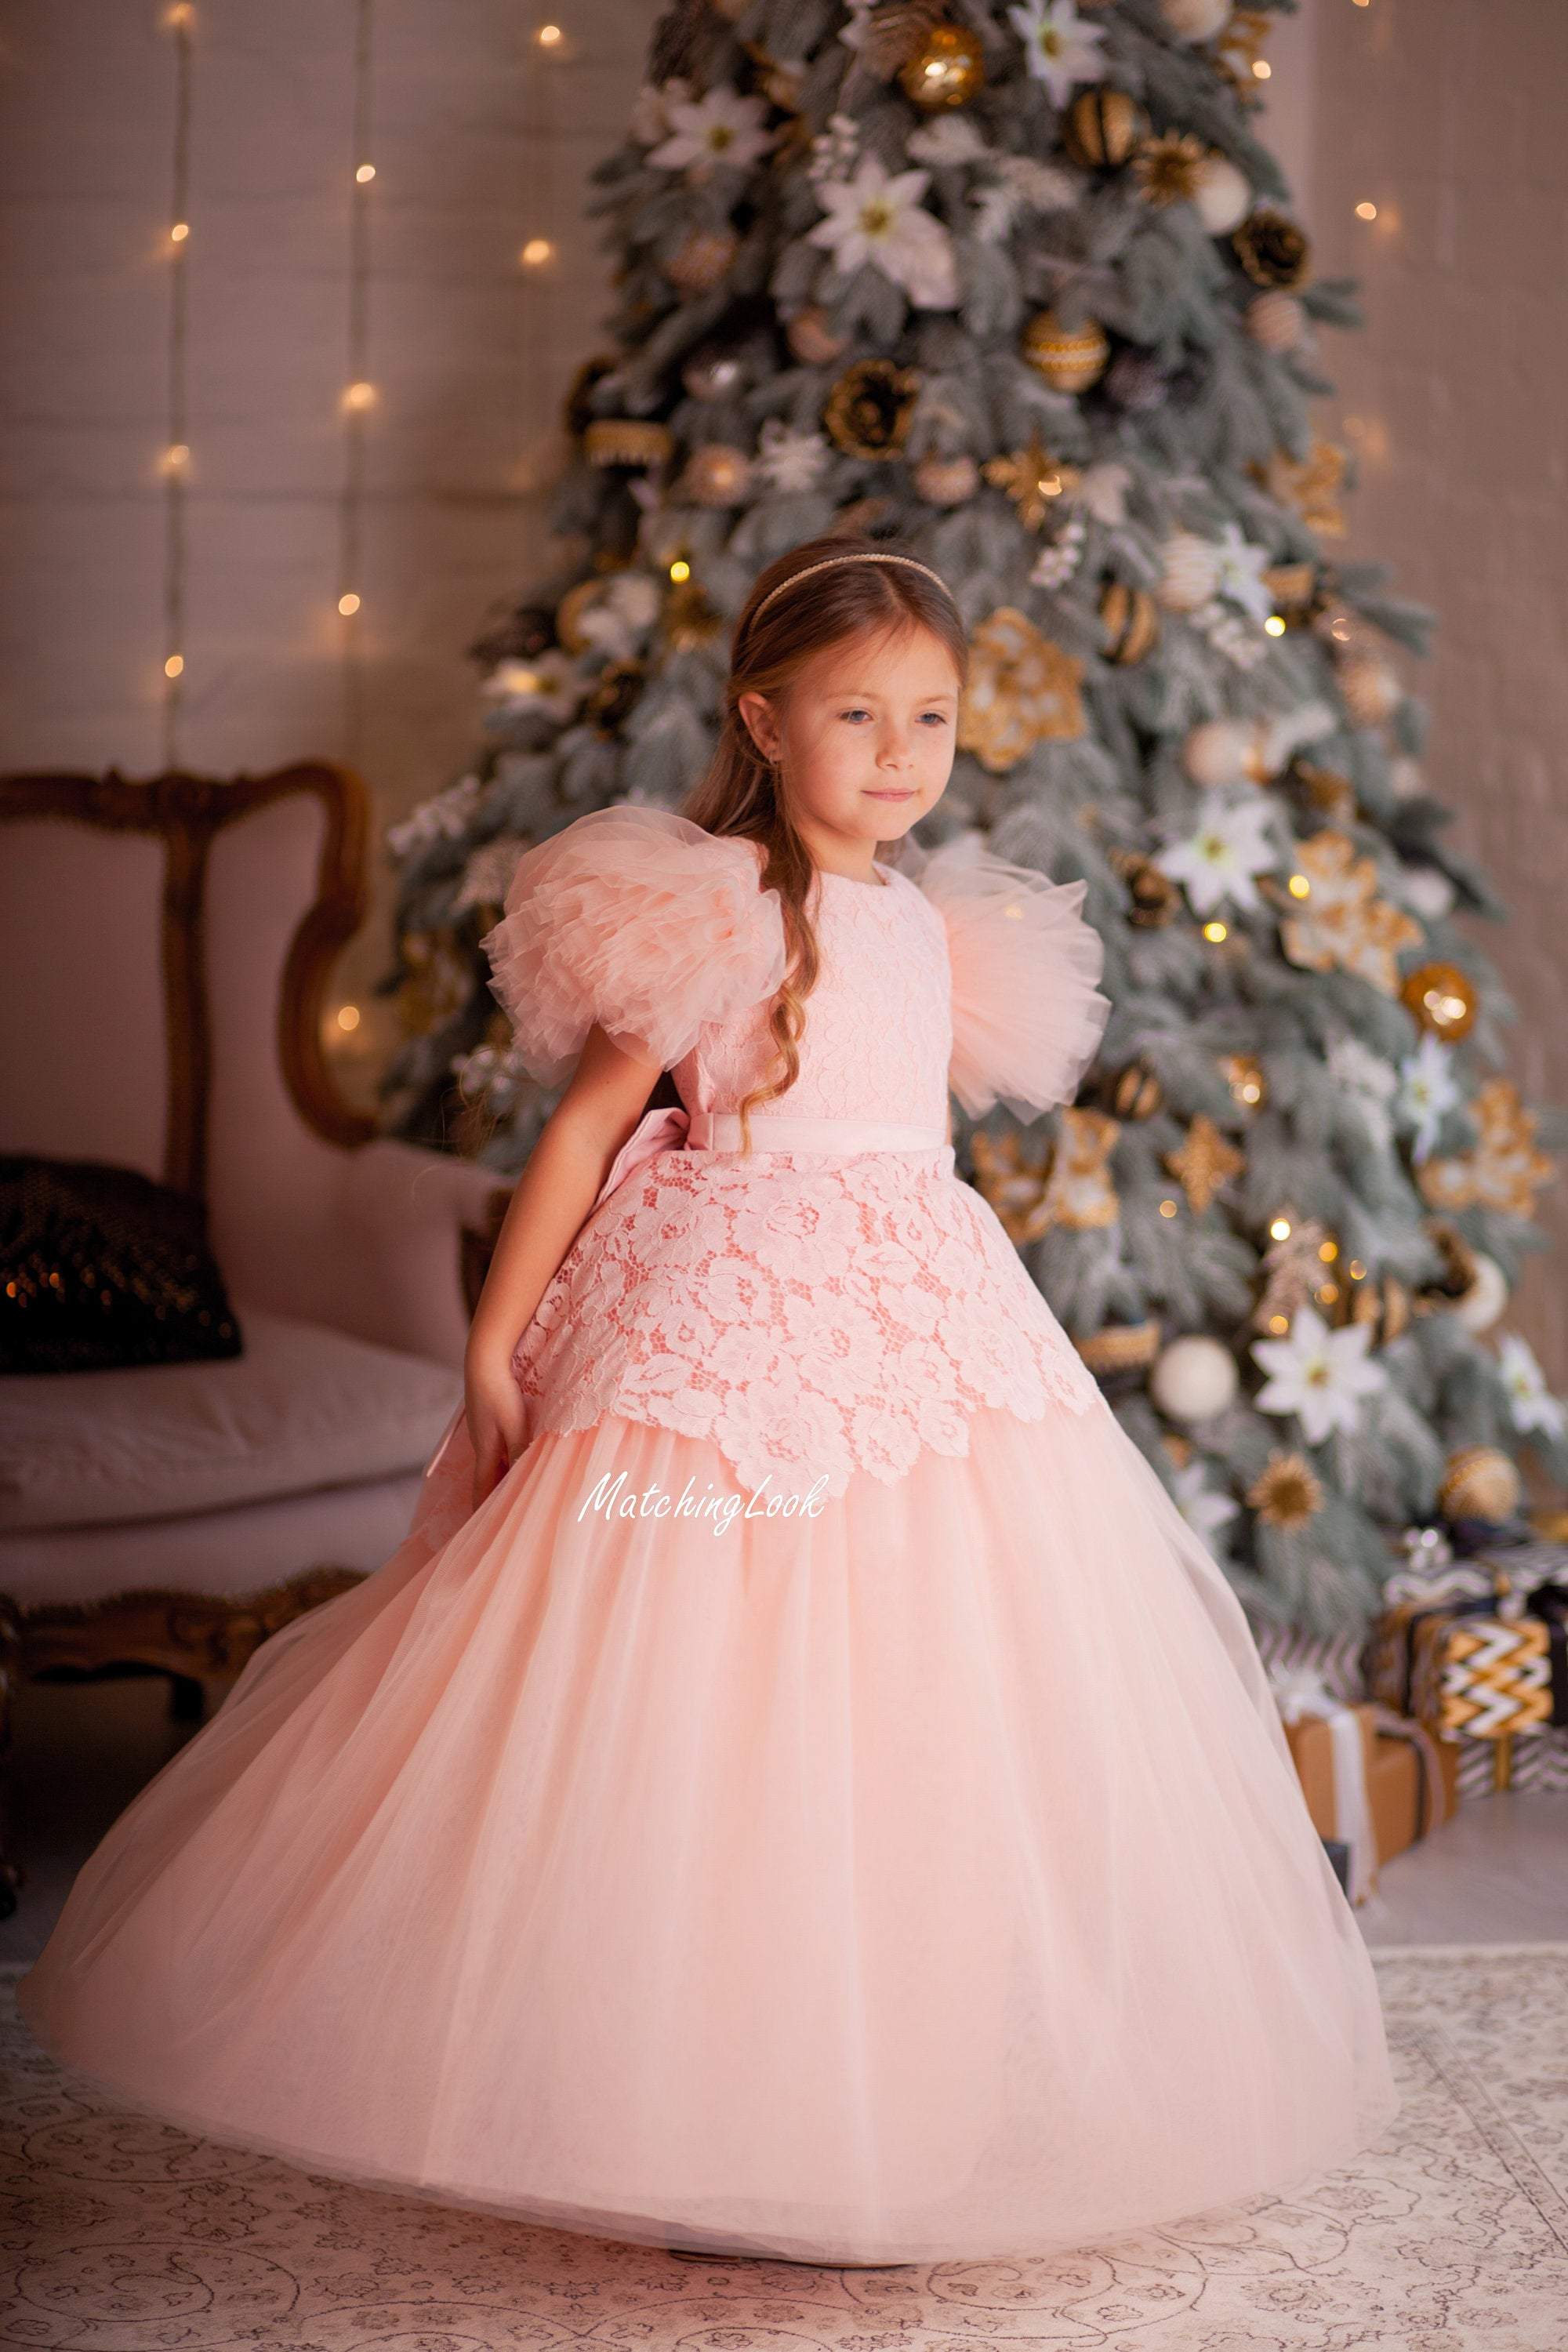 Buy Satin And Tulle Flower Girl Dress - Champagne - Fabulous Bargains Galore